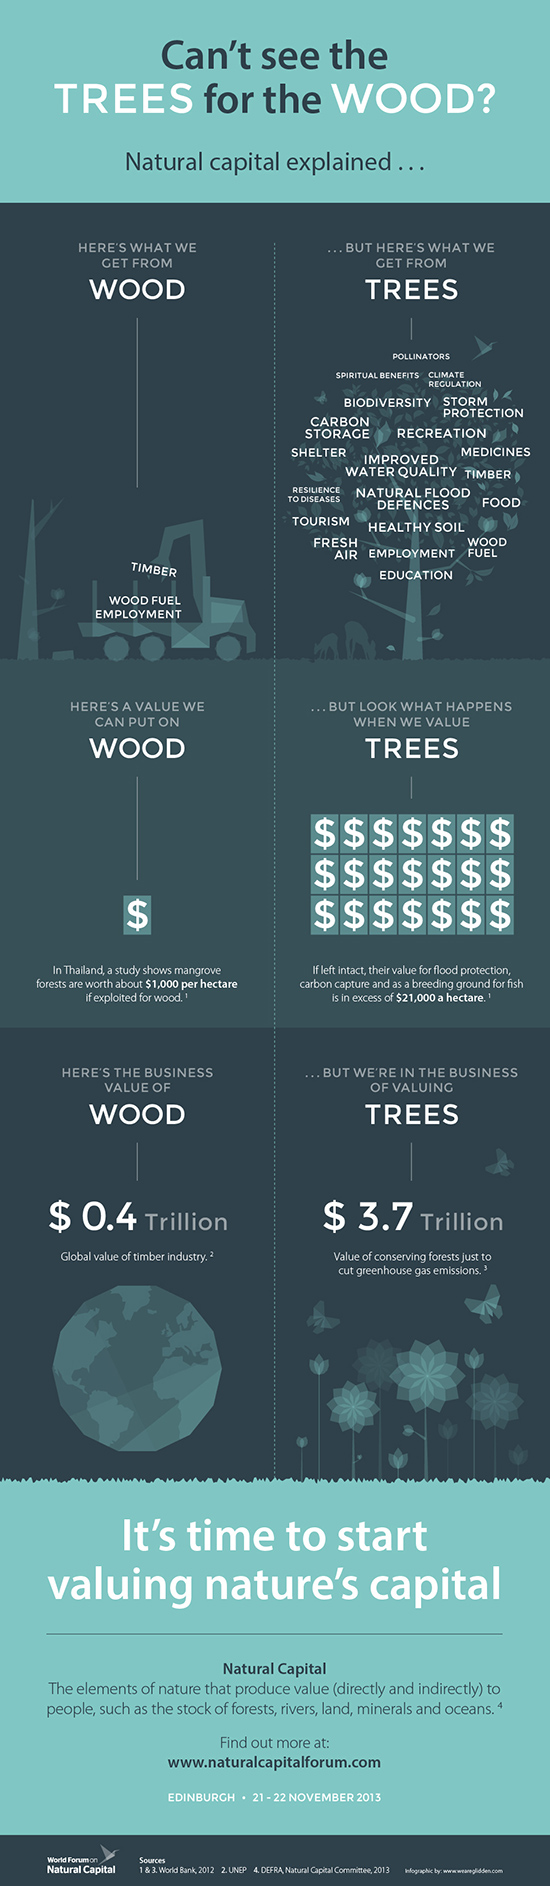 Can't see the TREES for the WOOD - Infographic